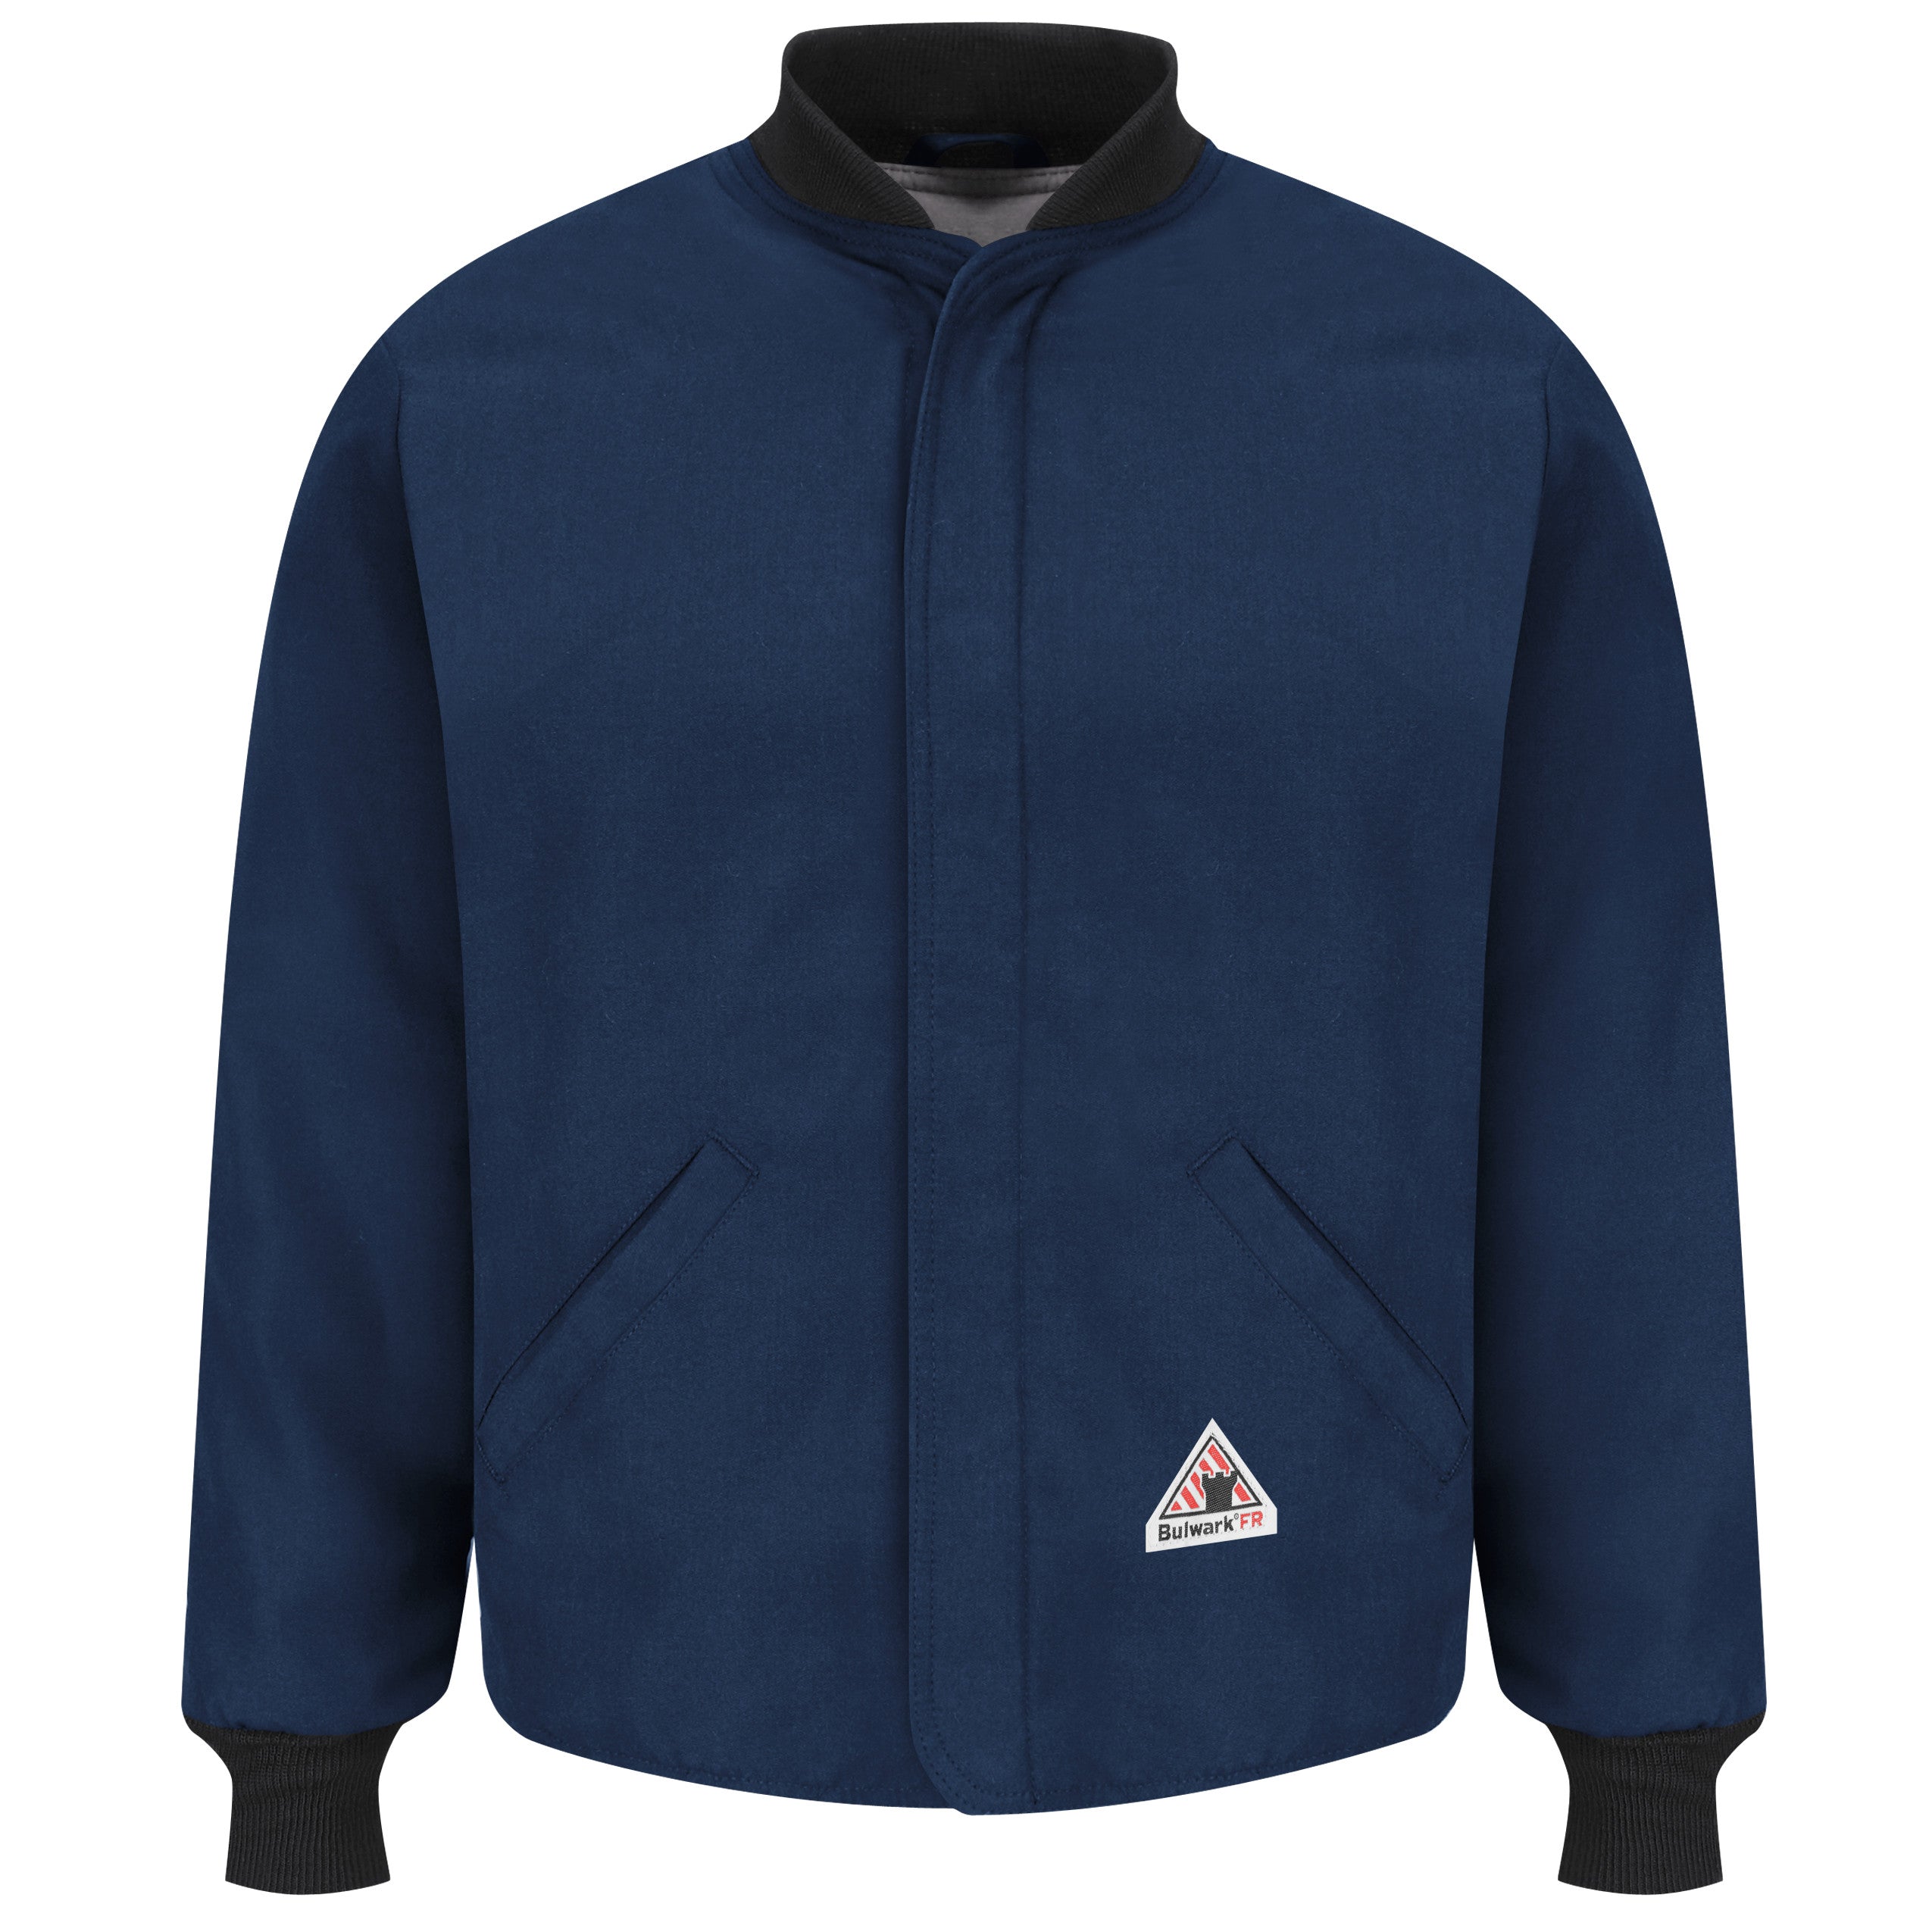 Outerwear - Jacket LLL2 - Navy